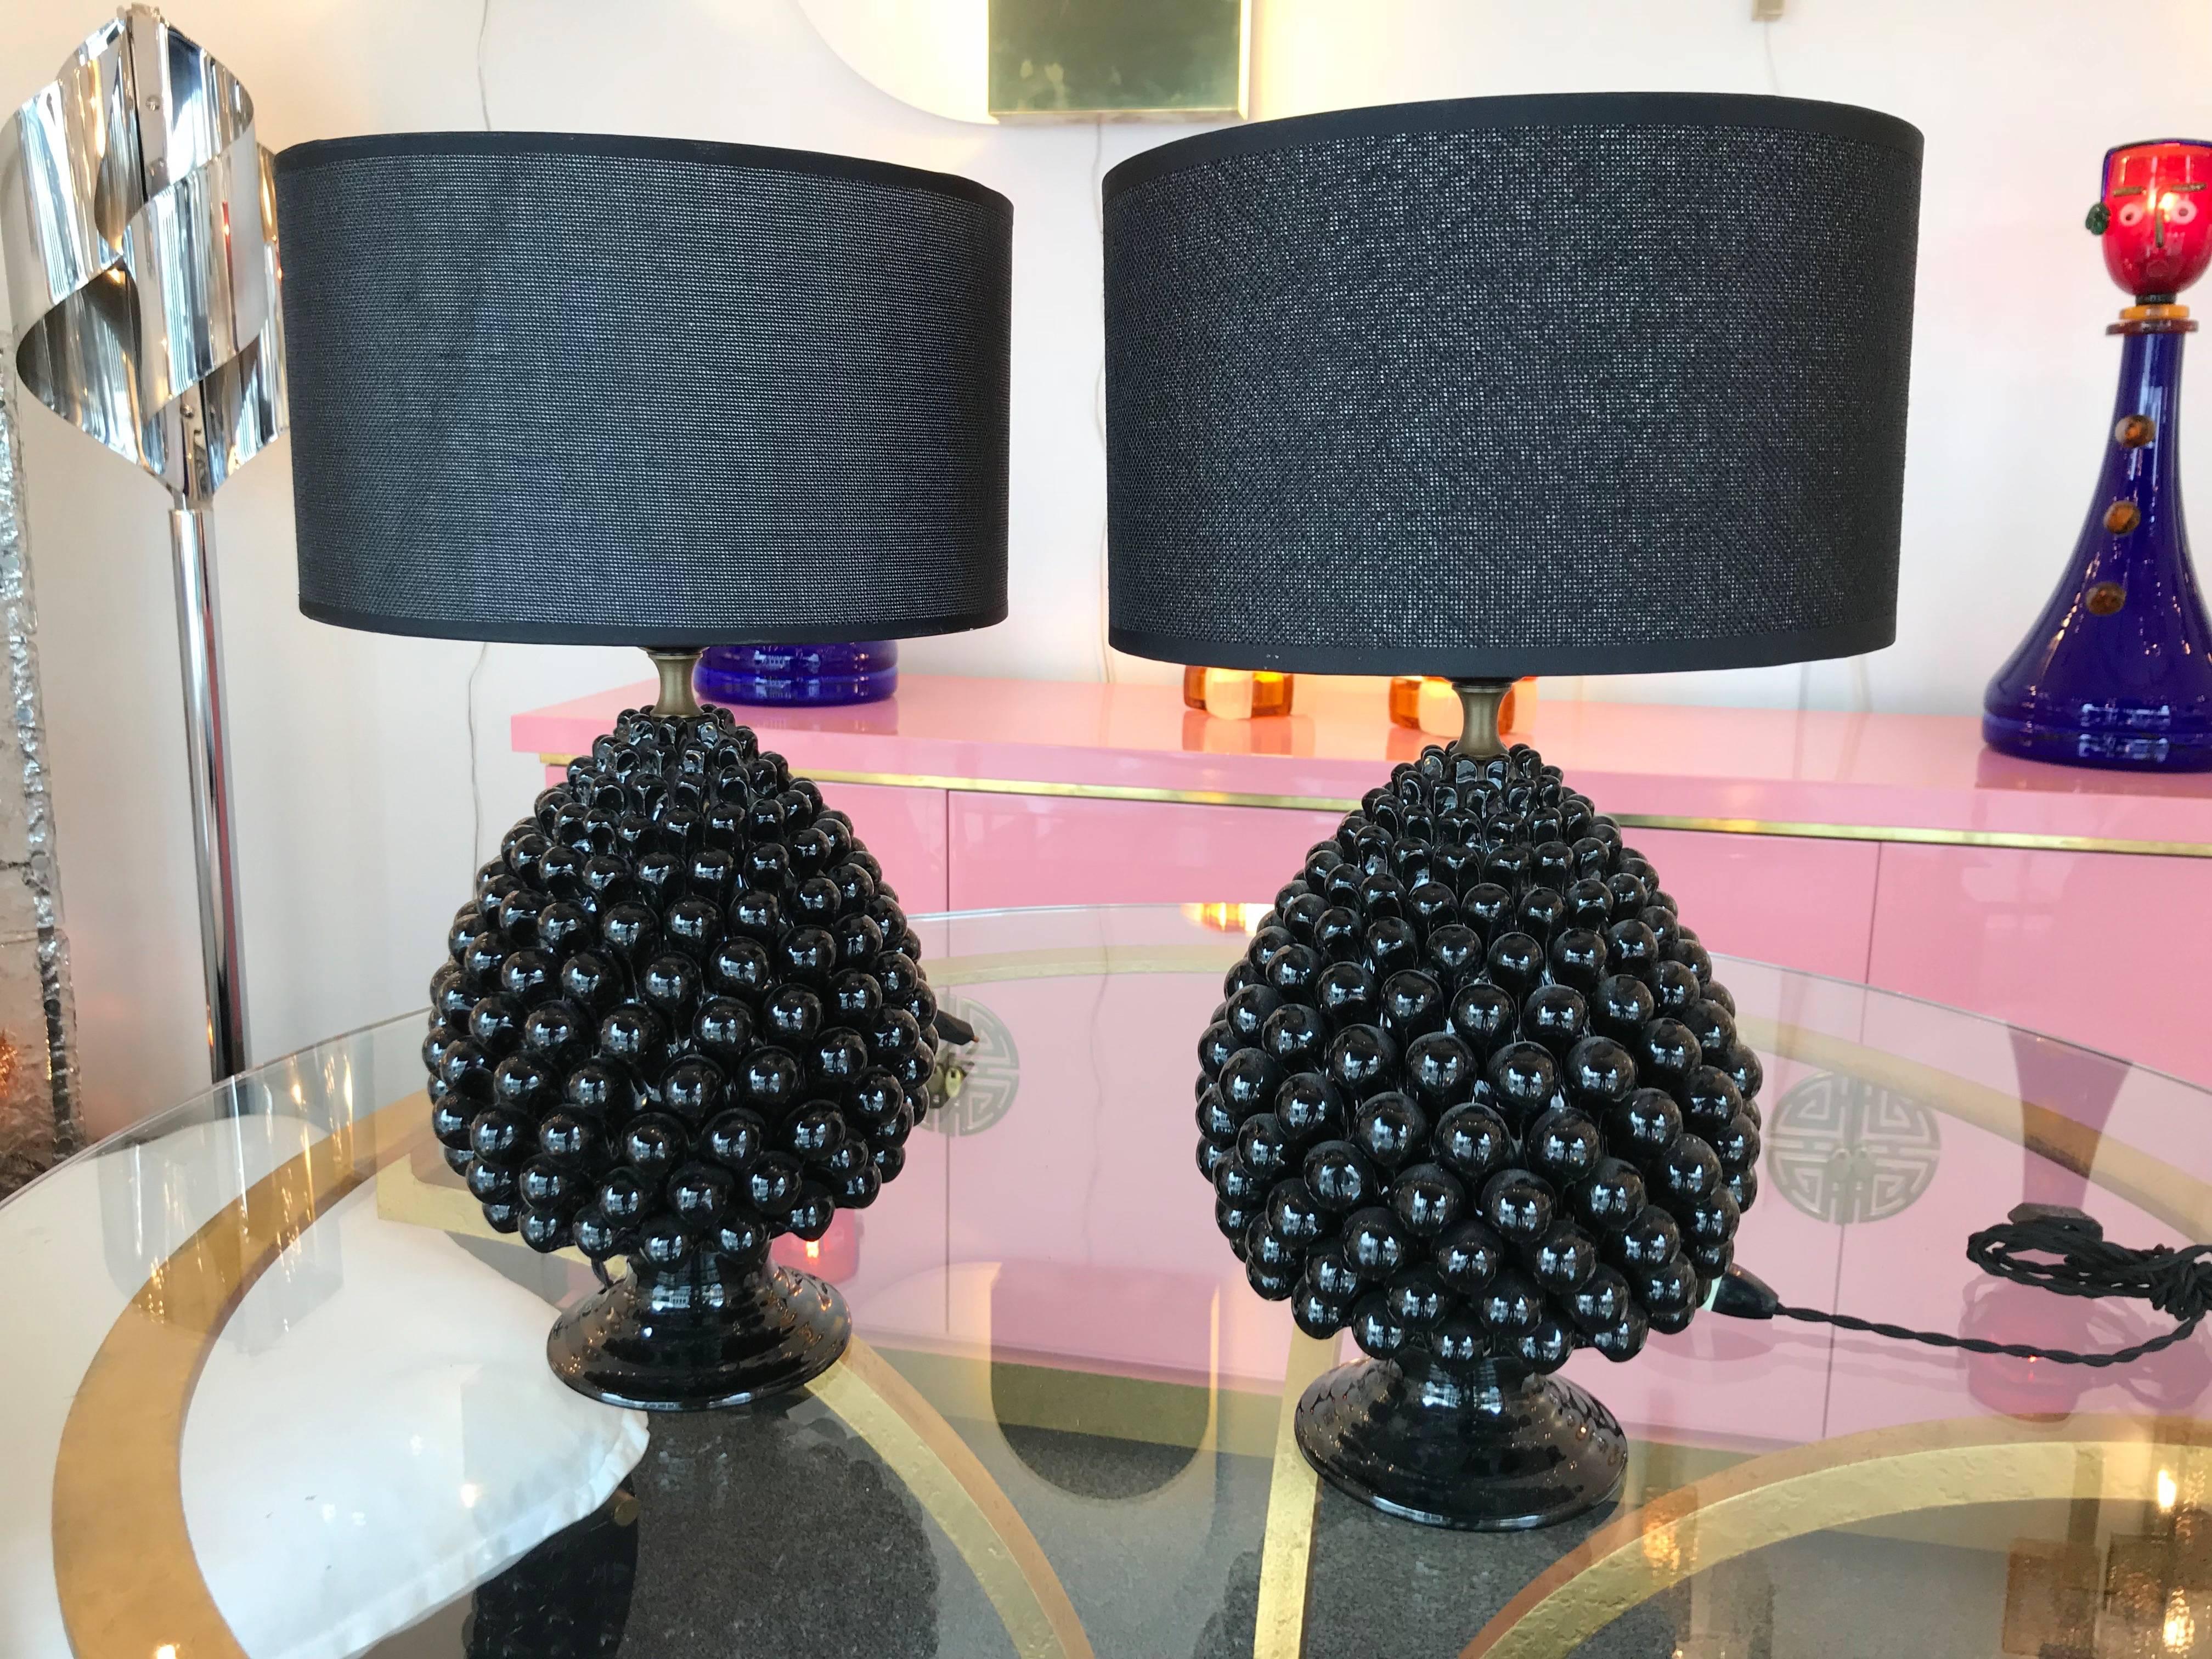 Pair of pine or pineapple black ceramic table or bedside lamps by the editor Firlaro Made in Italy.